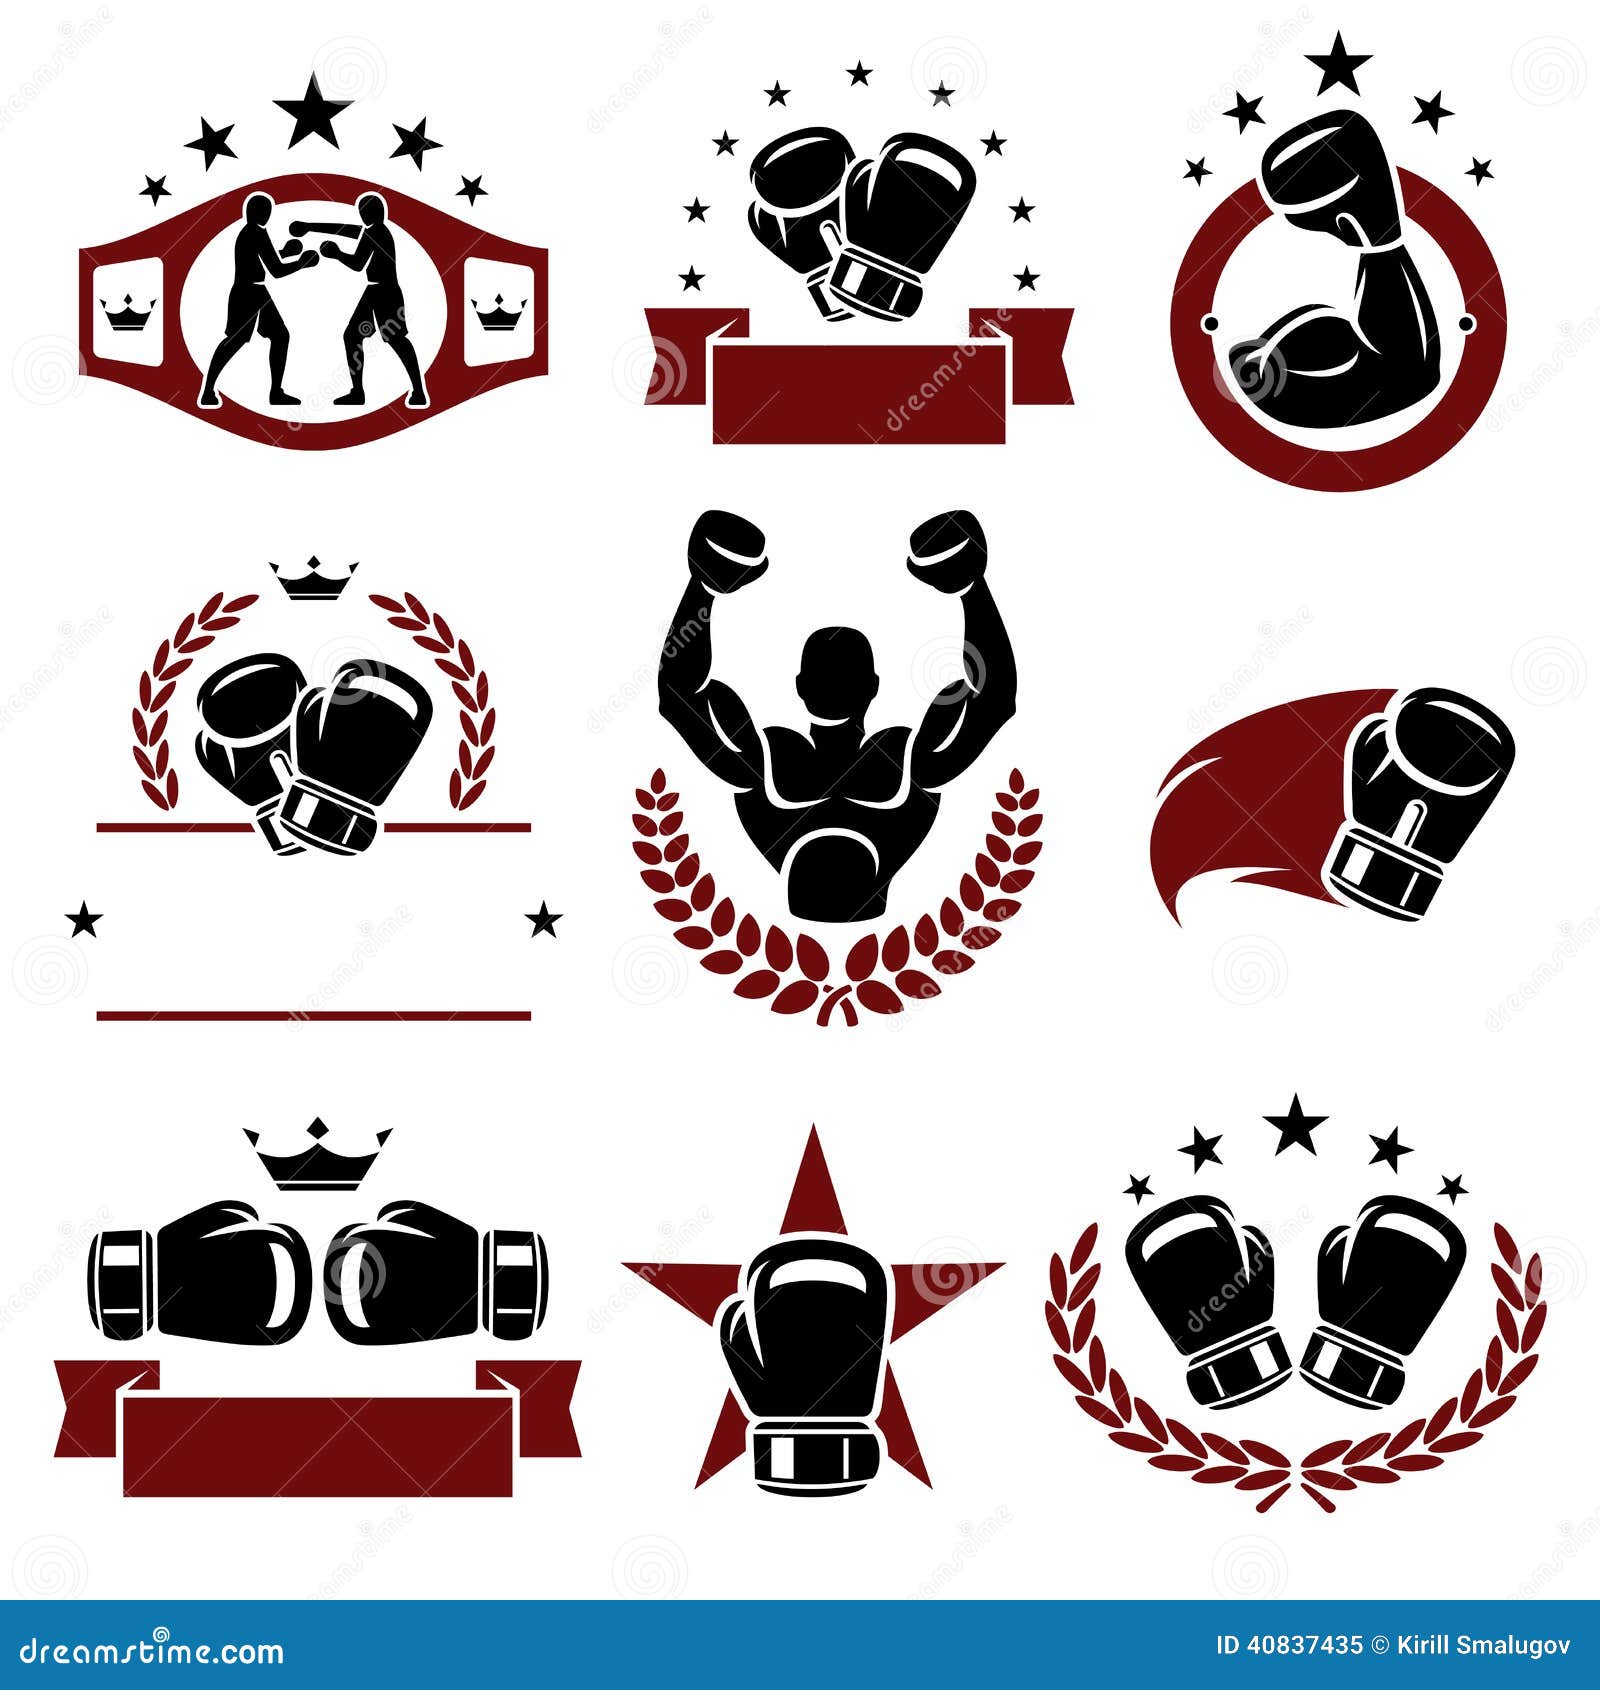 boxing clipart free download - photo #38